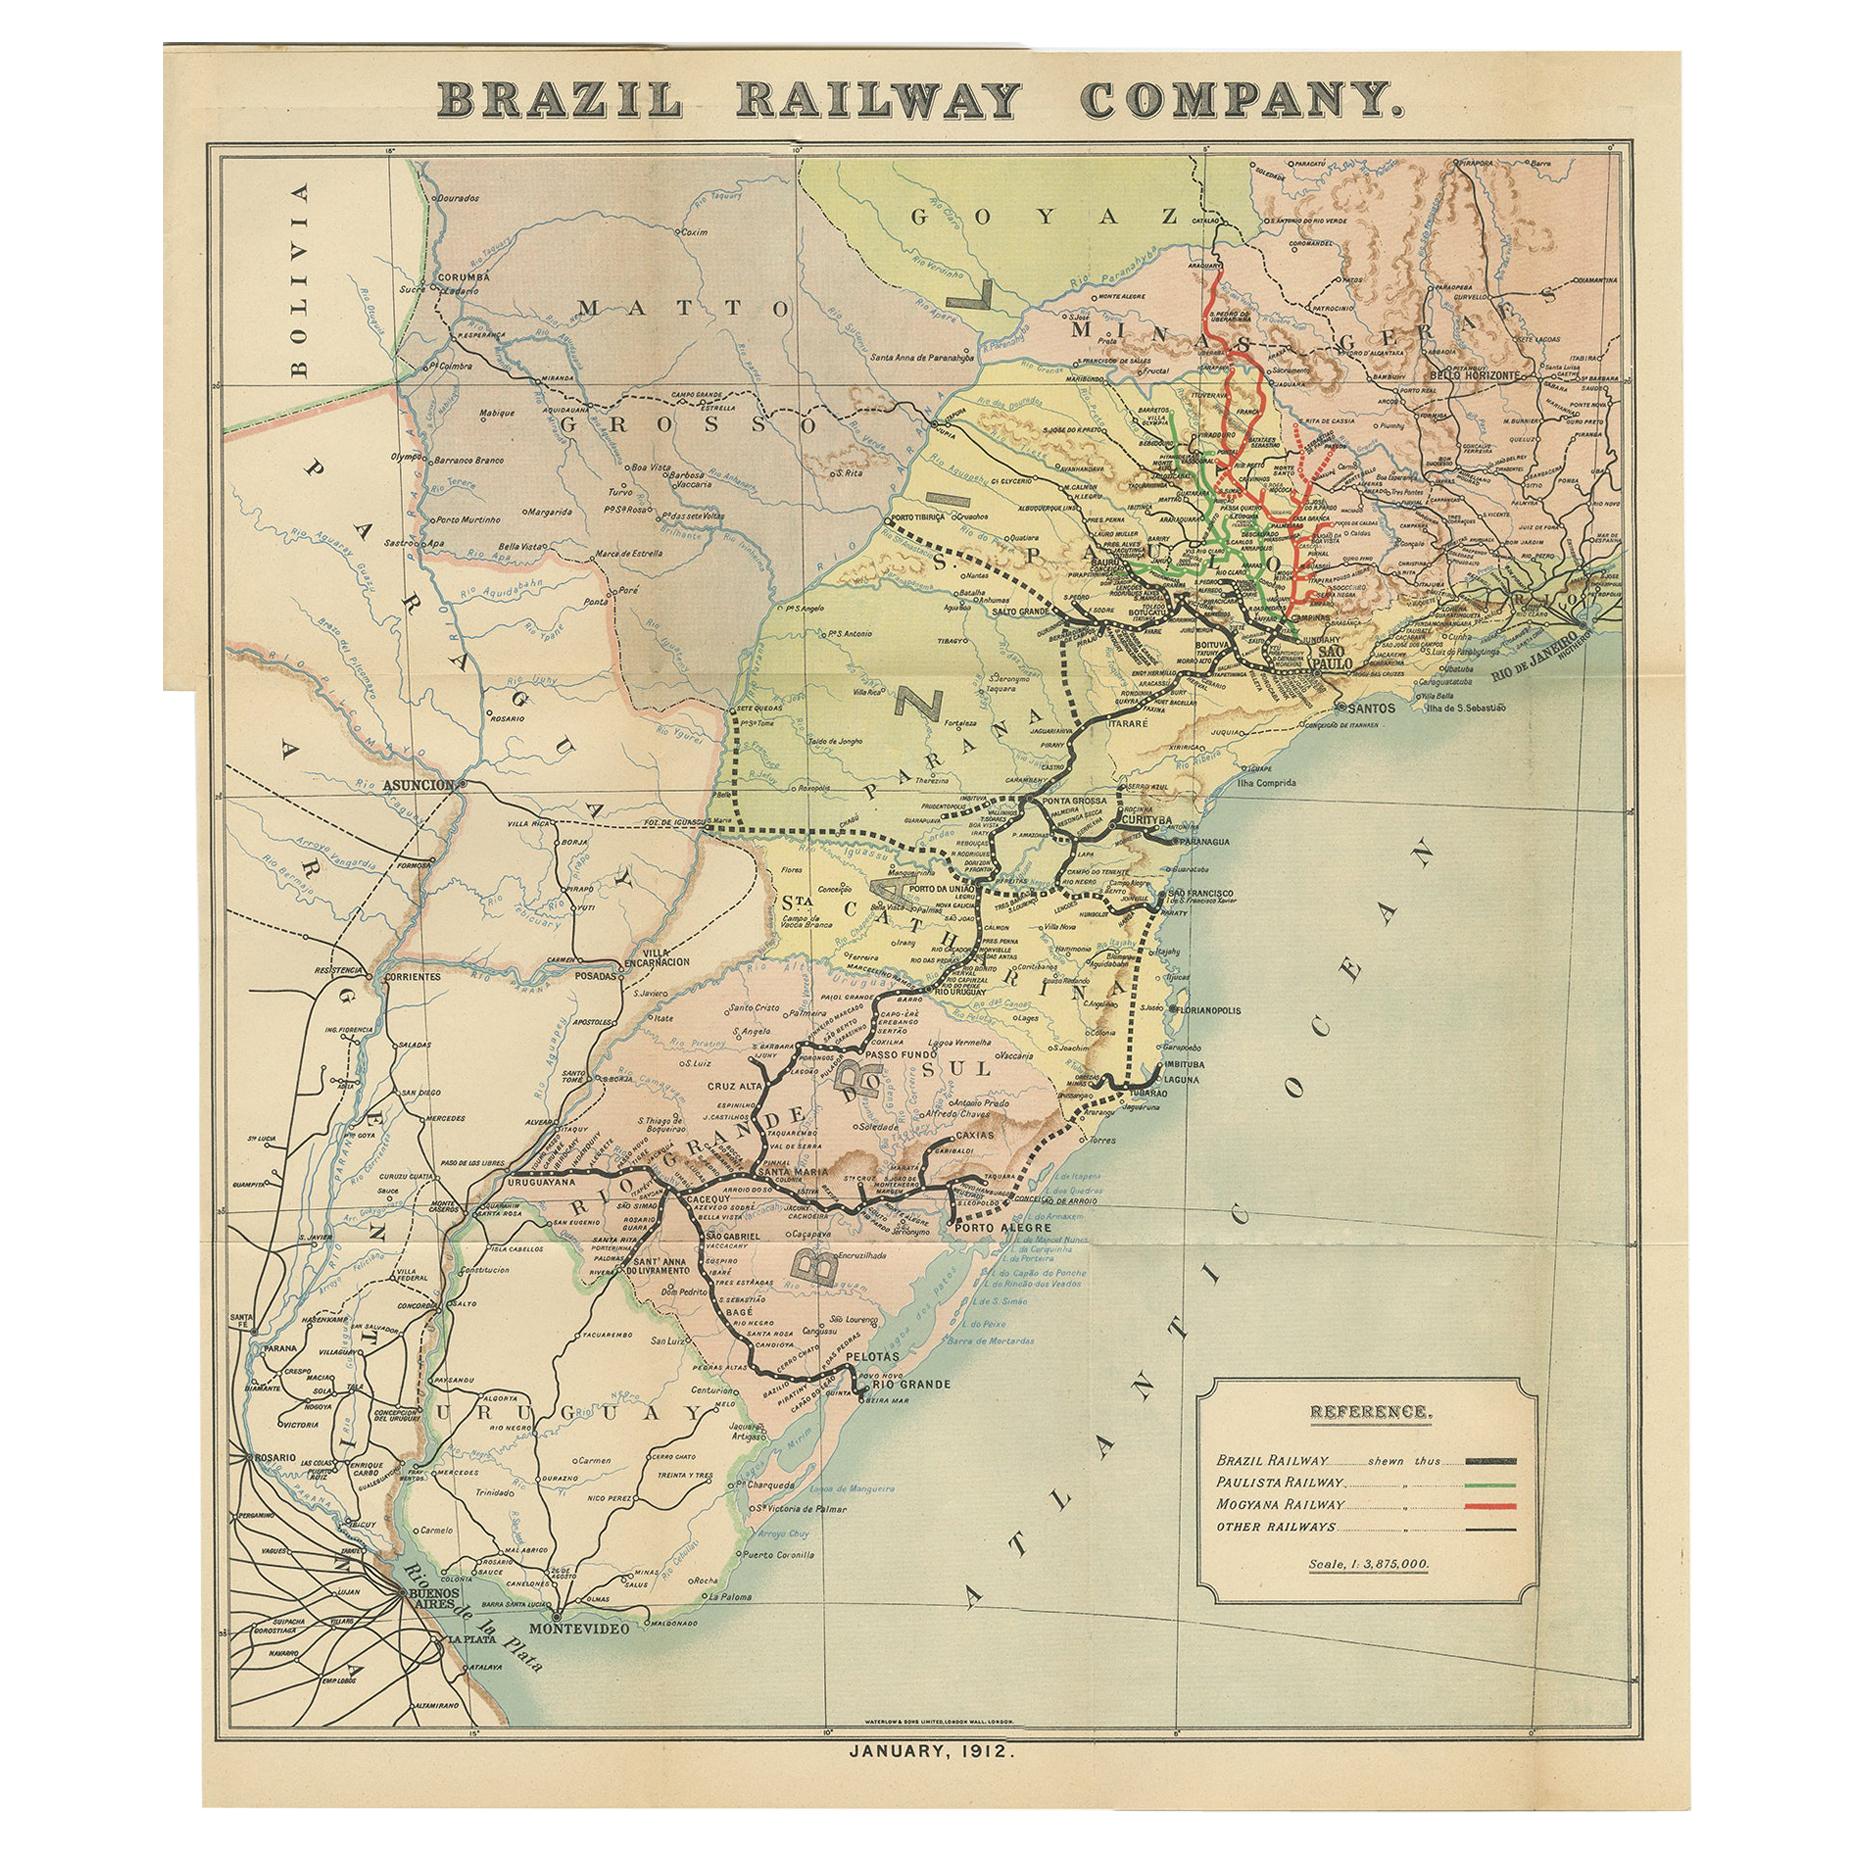 Antique Map of the Brazil Railway Company, '1912'